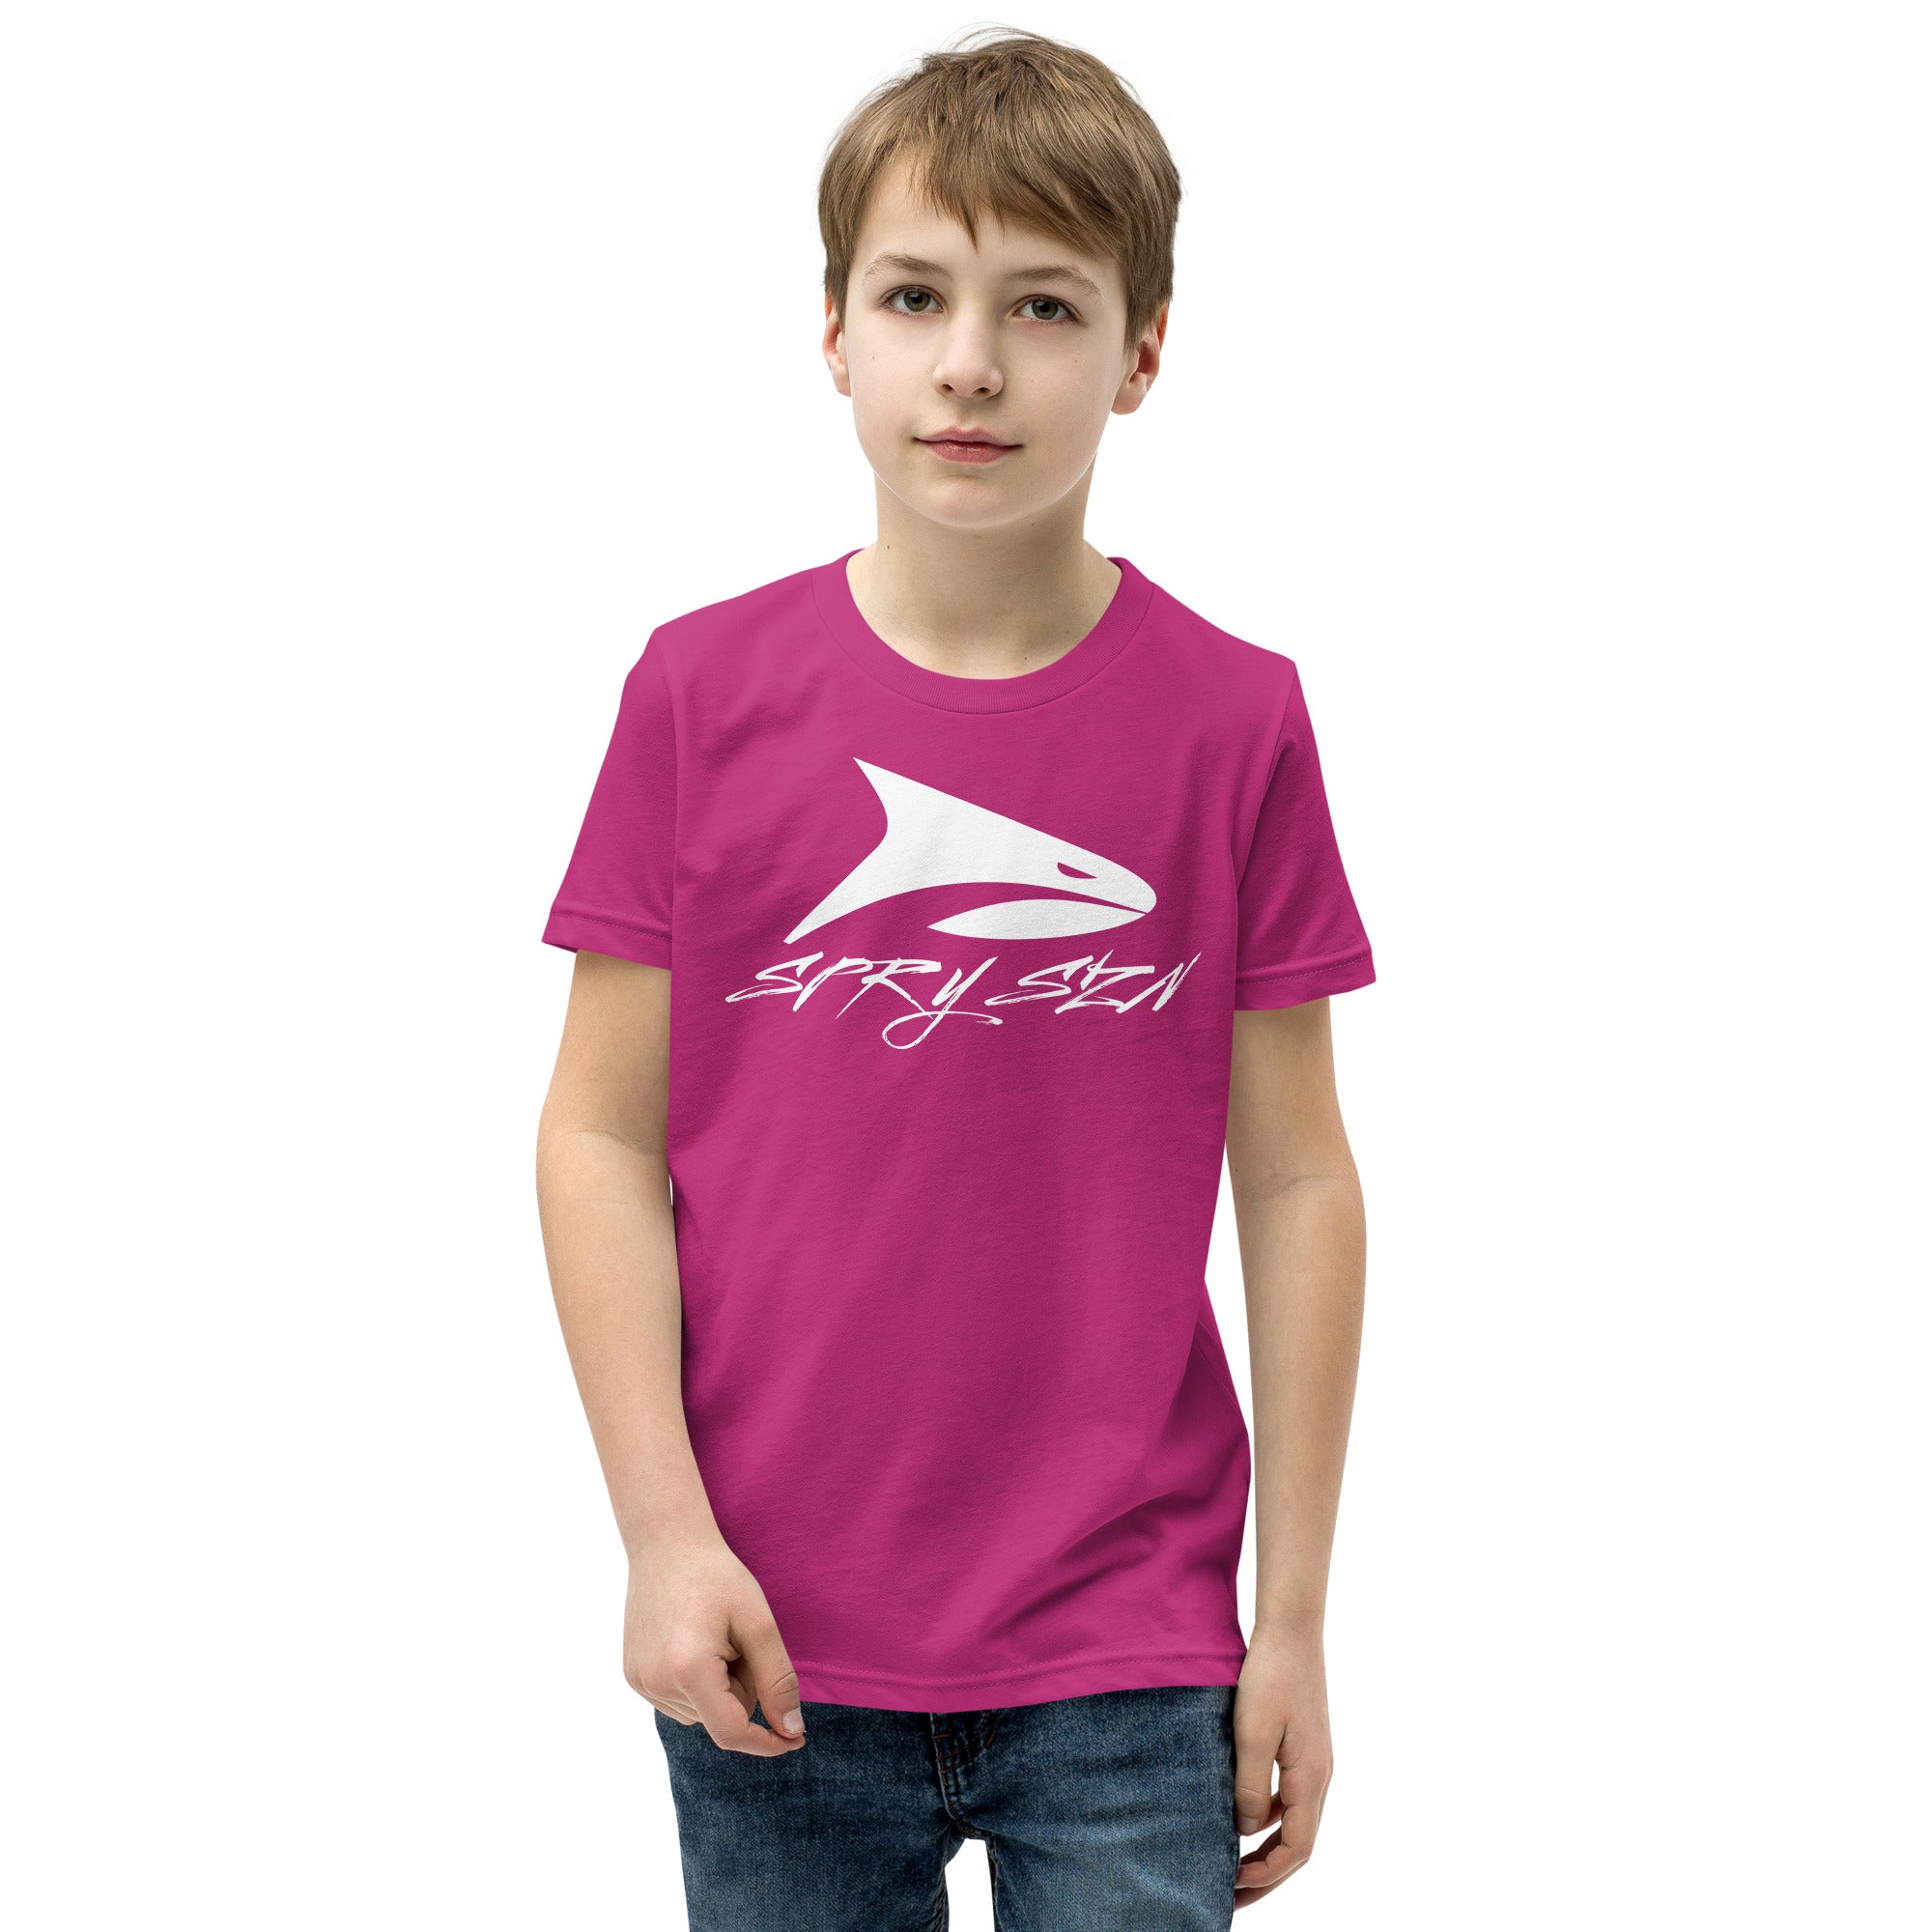 SPRY SZN White Shark Youth T-Shirt